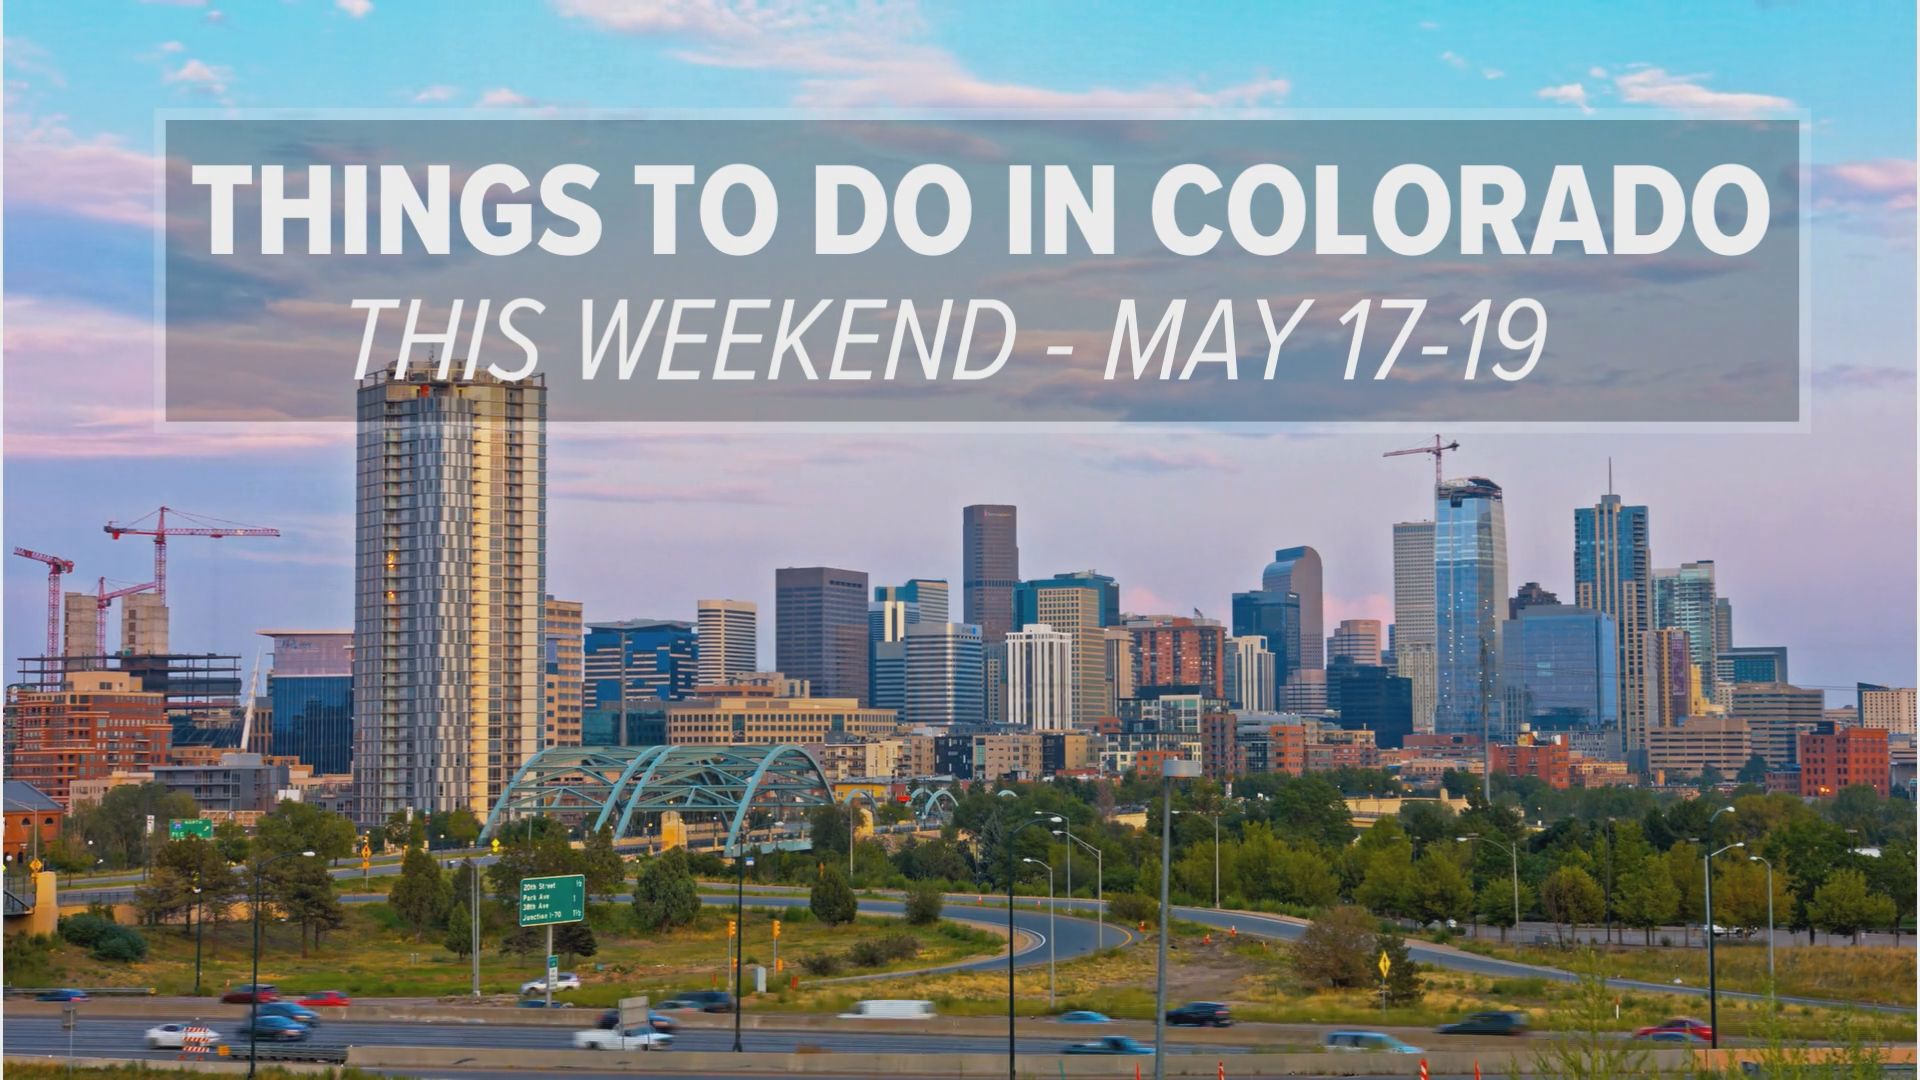 Denver’s largest running weekend is here, along with several popular festivals, food events, concerts and shows.